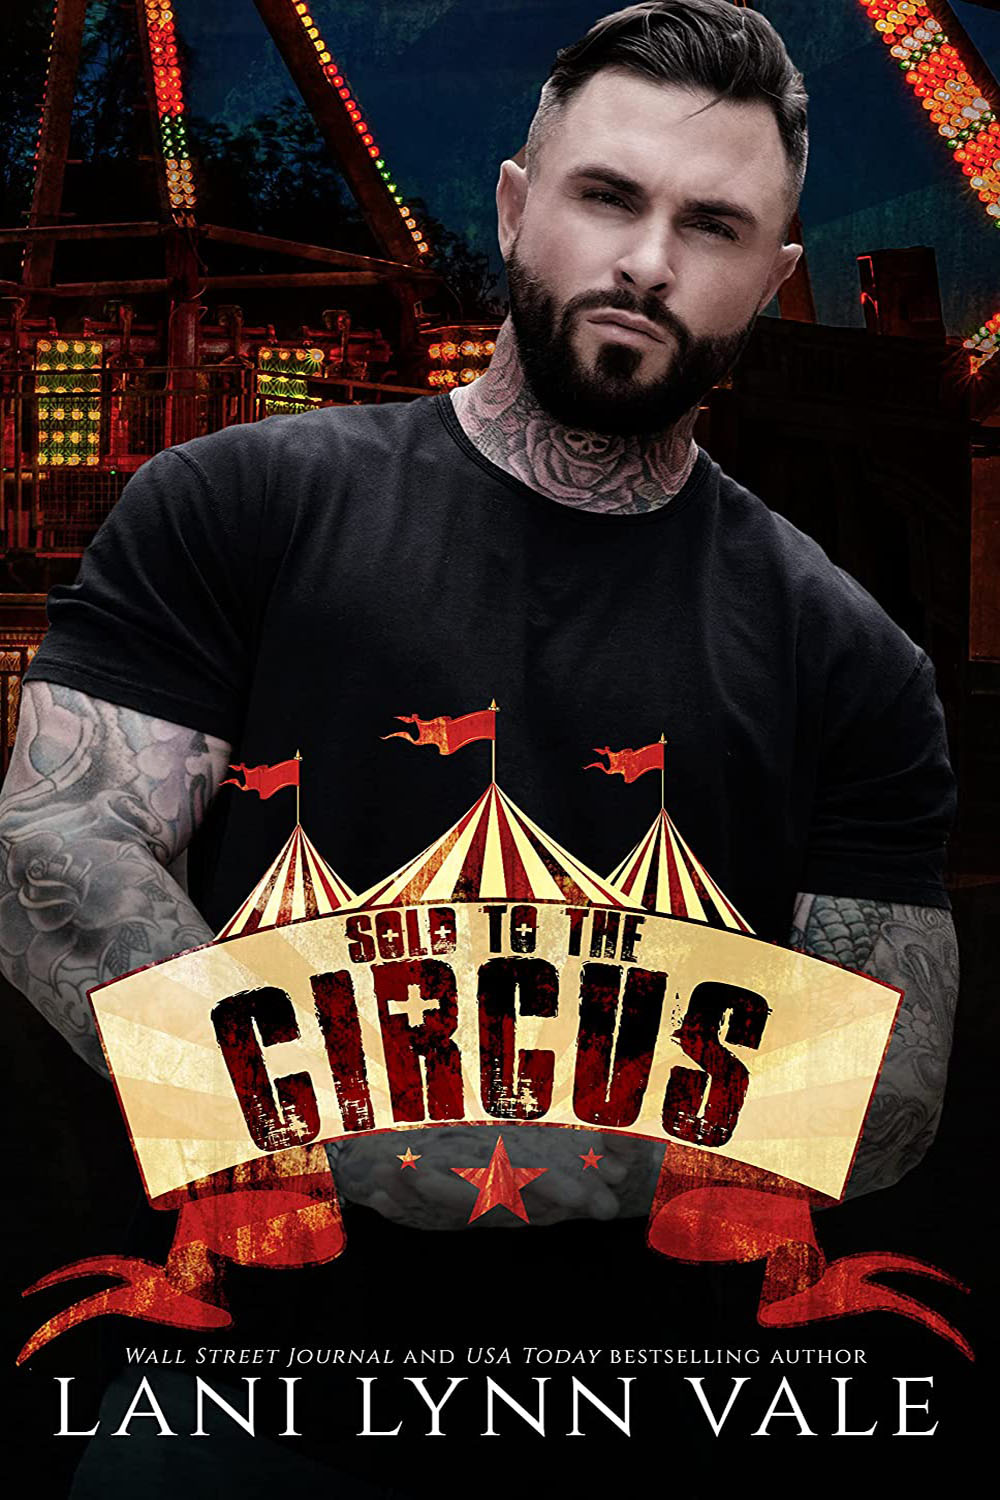 Sold to the Circus (Welcome to the Circus #5)